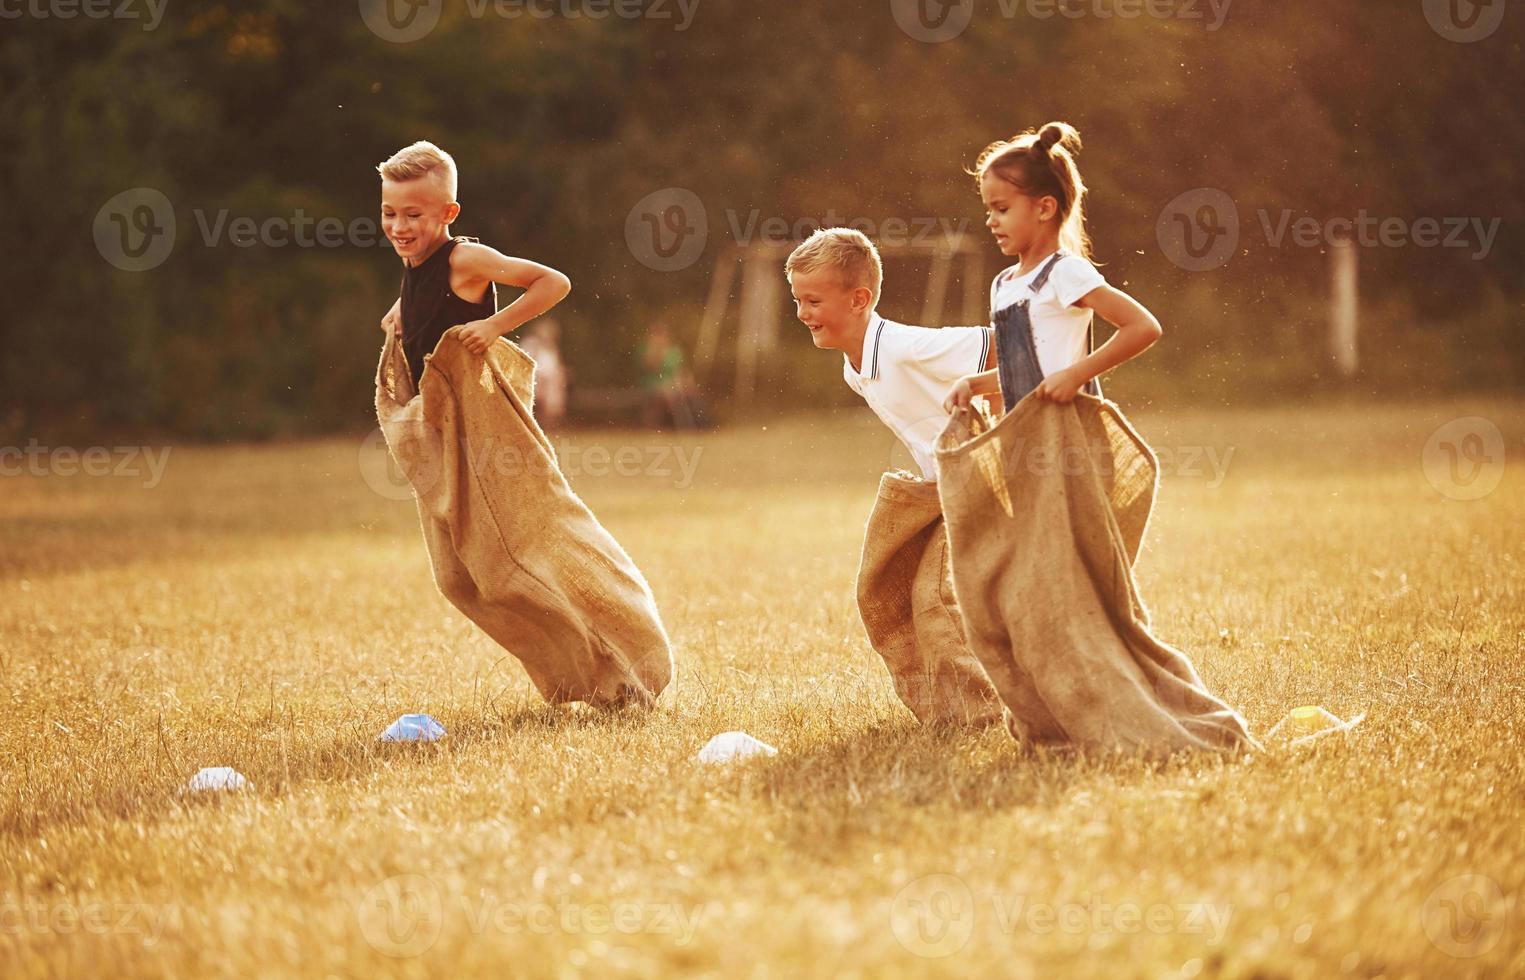 Jumping sack race outdoors in the field. Kids have fun at sunny daytime photo